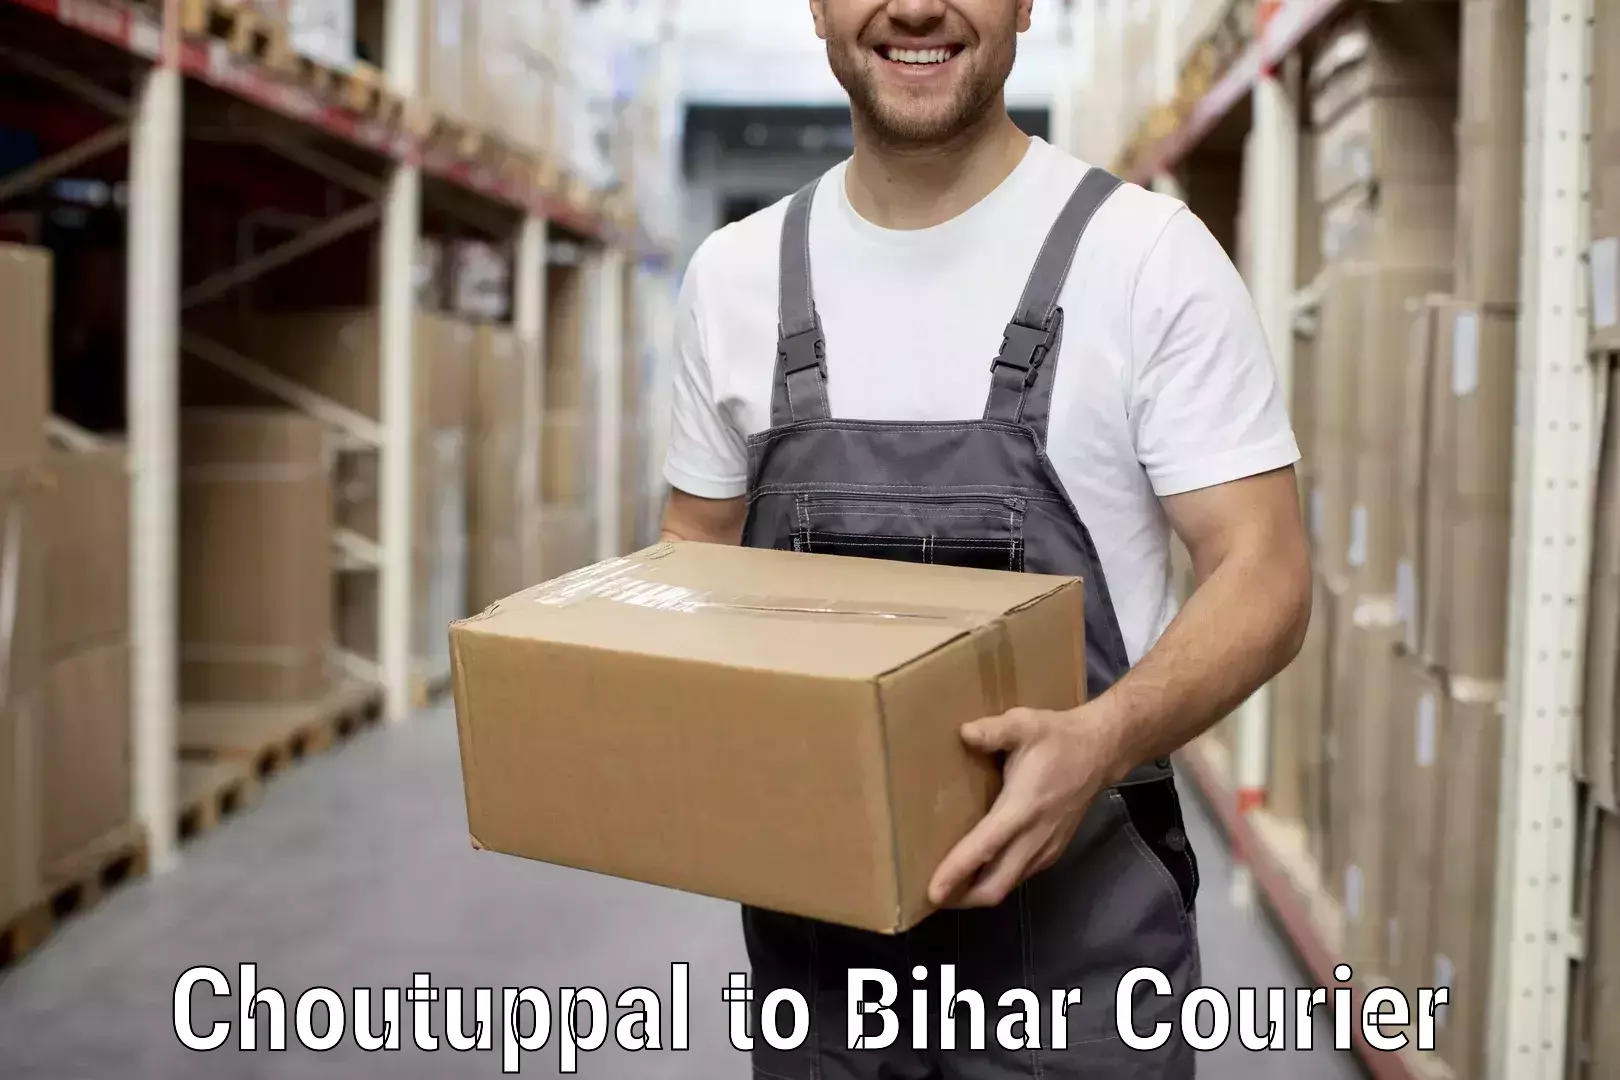 Furniture delivery service Choutuppal to Bhorey